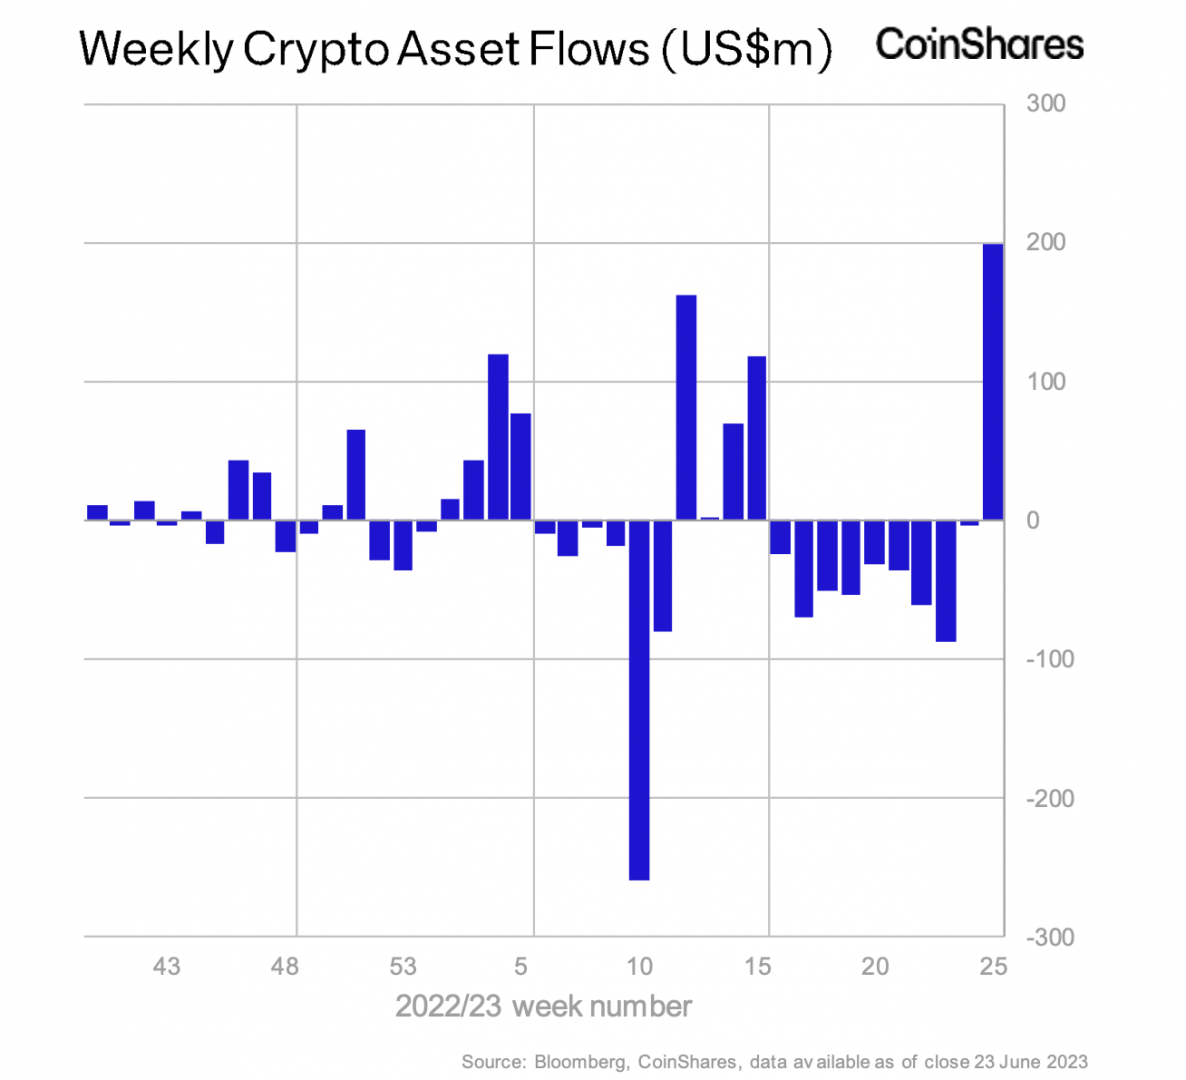 Bitcoin Attracts Capital, Coinshares Records Record Investment Week - June 27, 2023. 